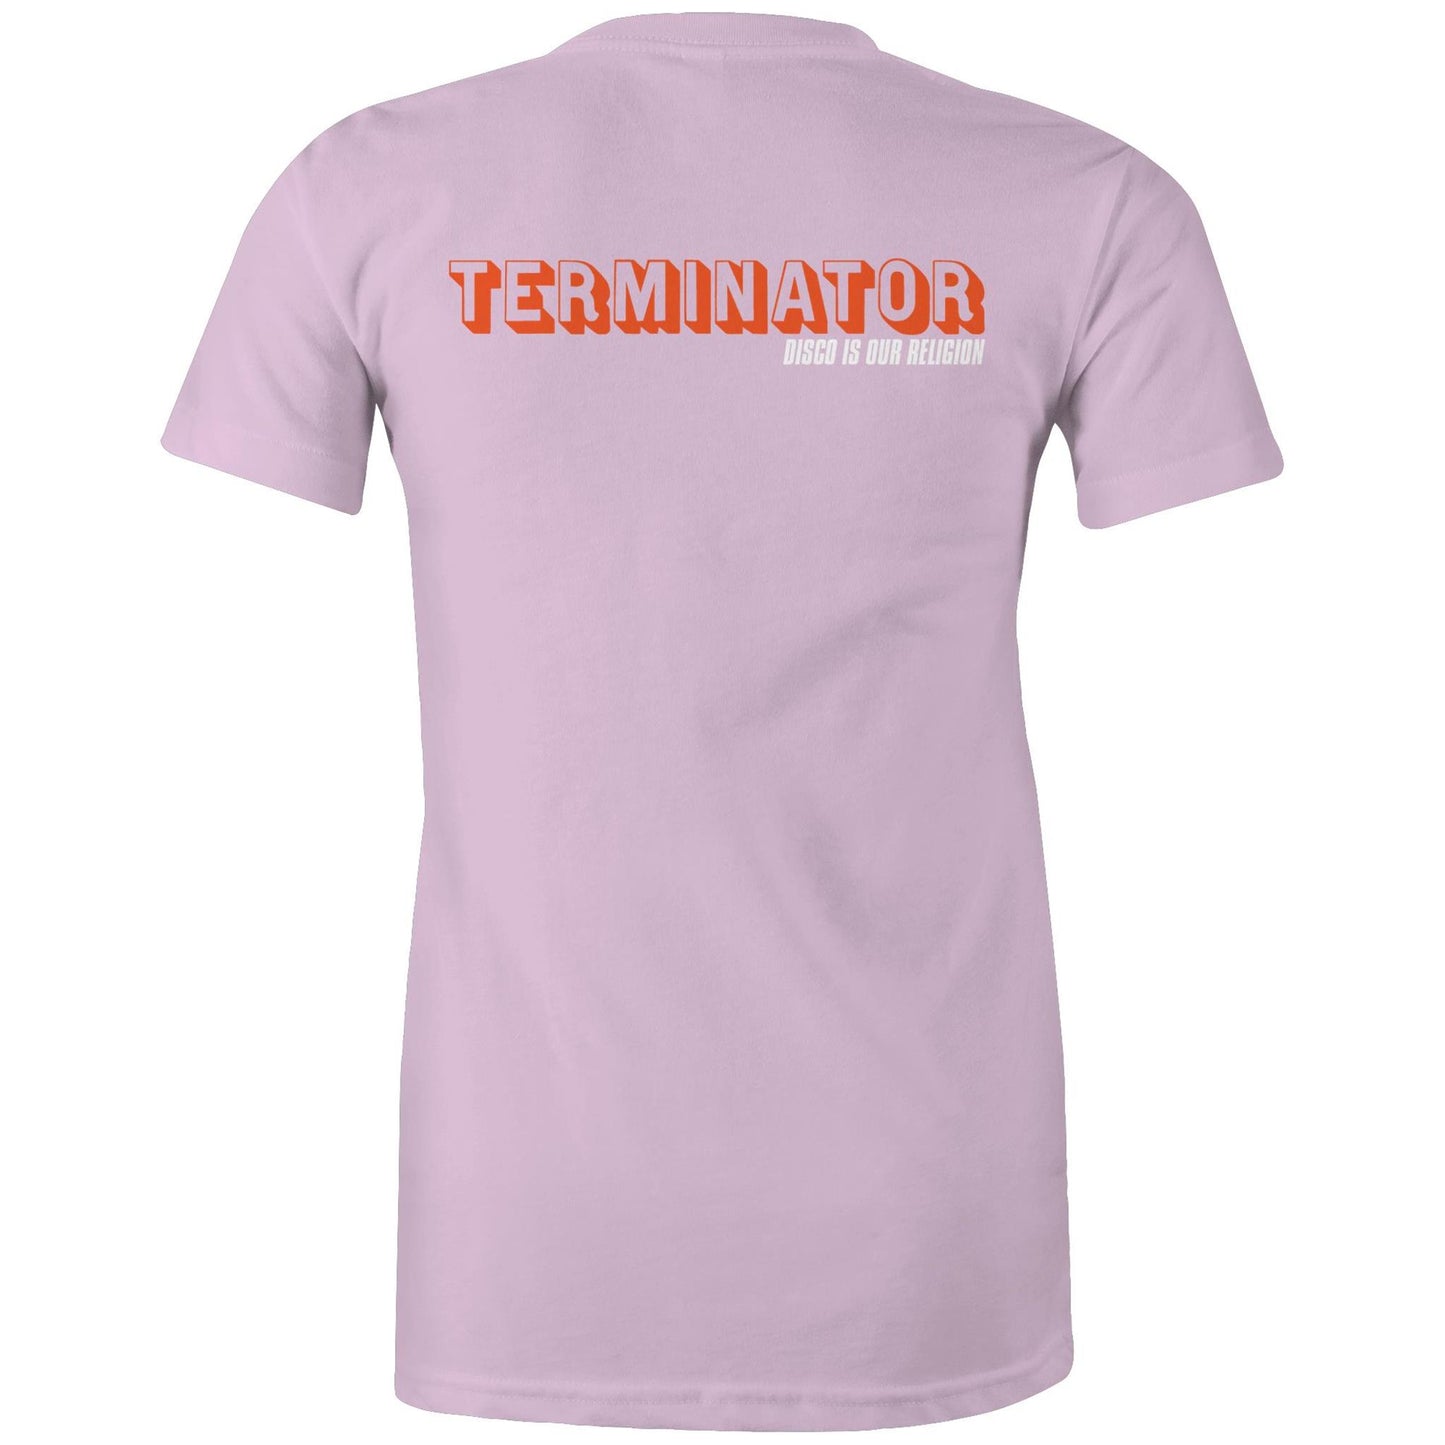 Groove Terminator (Disco Is Our Religion) Front & Back Print Womens Tee